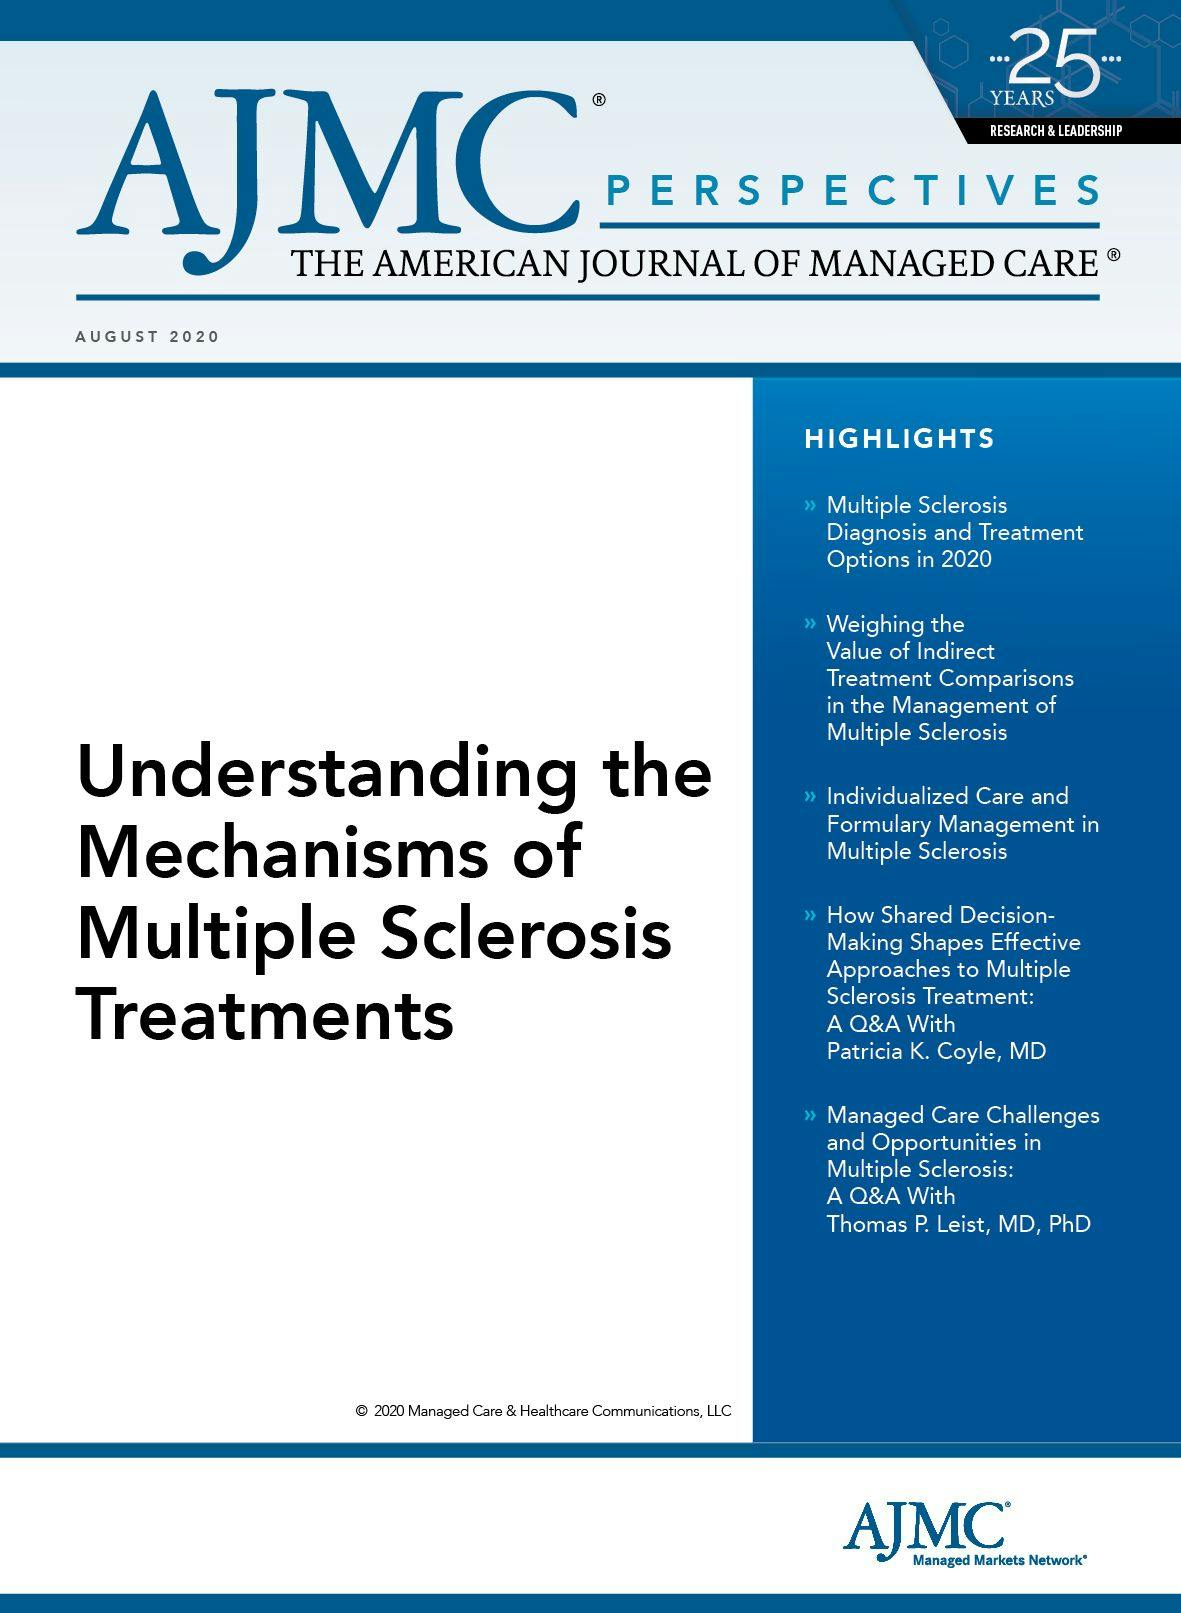 Understanding the Mechanisms of Multiple Sclerosis Treatments